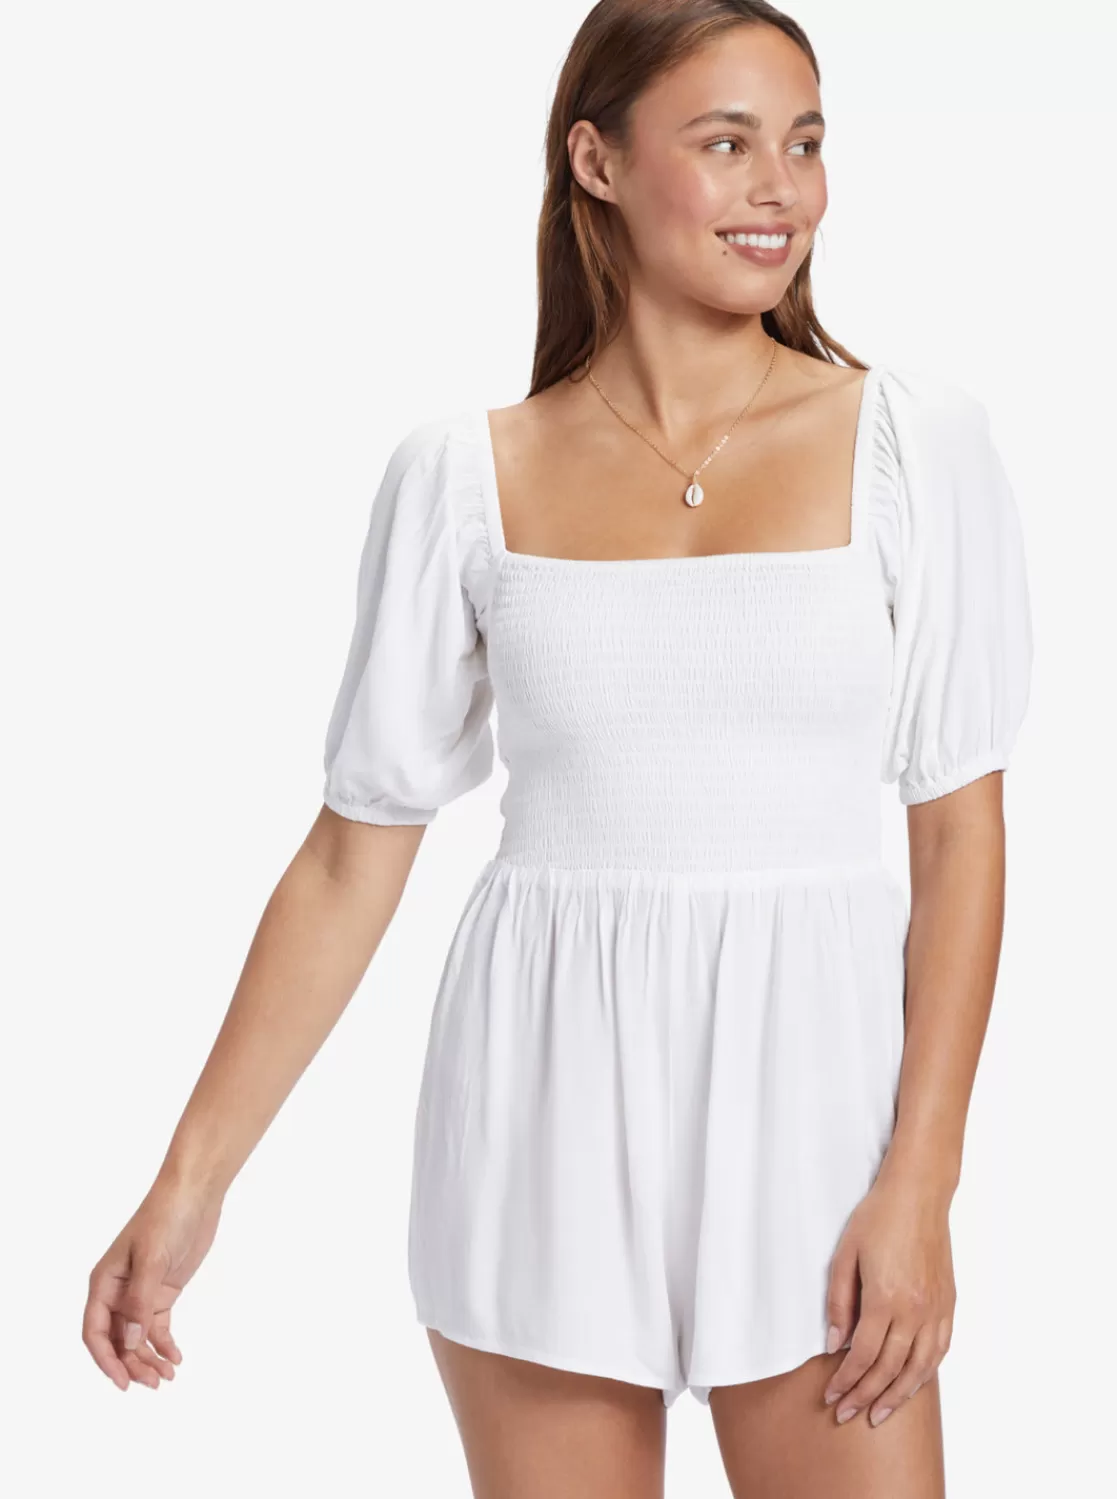 Barefoot Babe Romper-ROXY Outlet